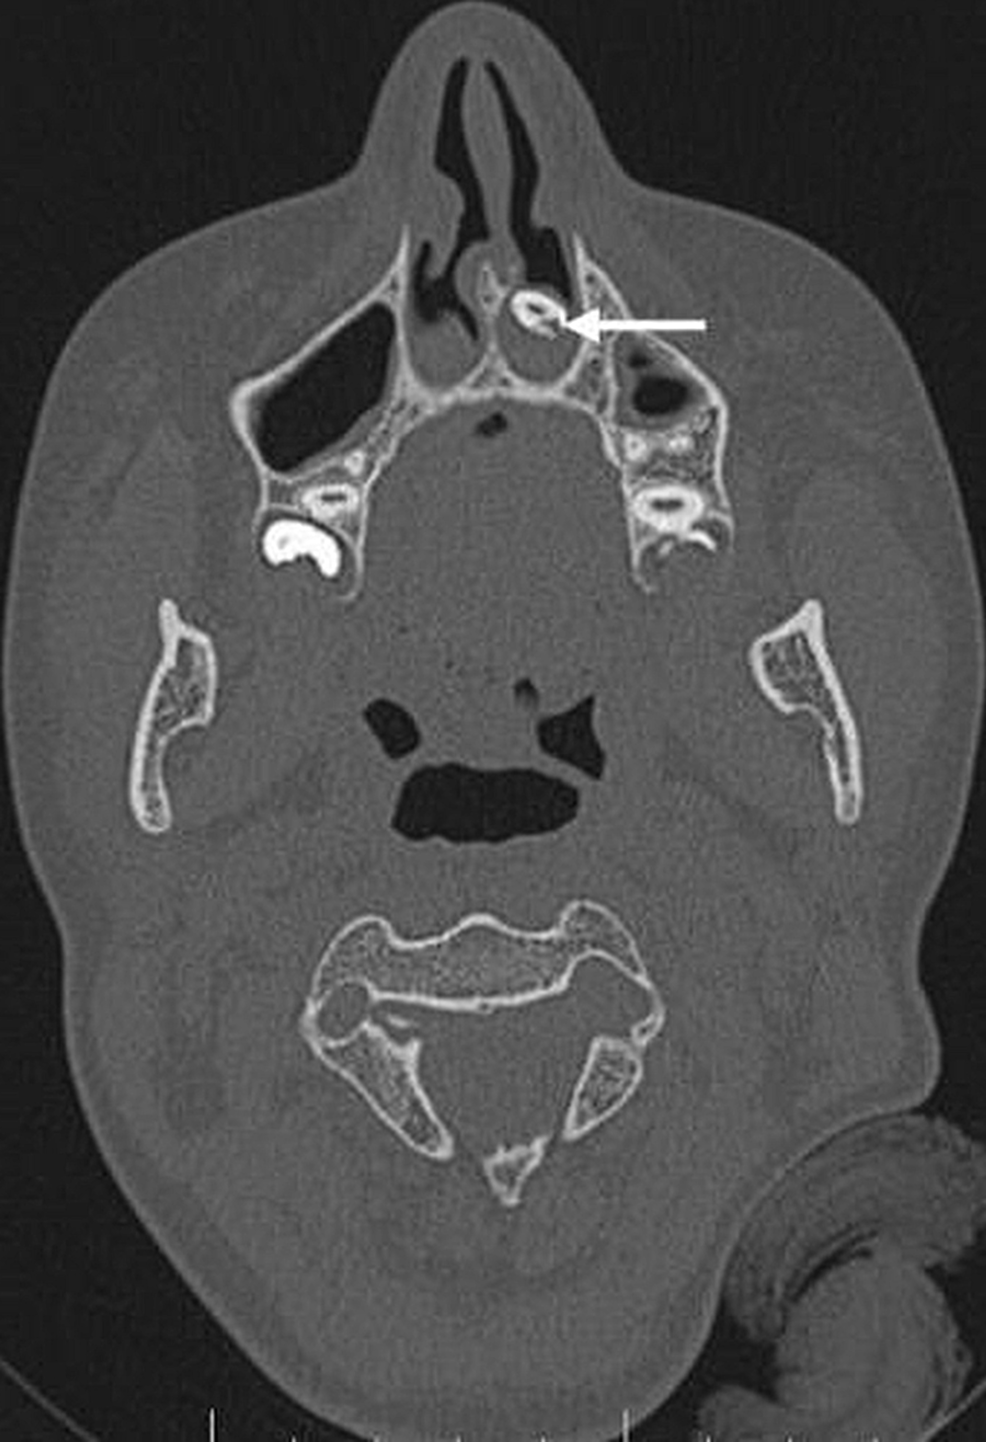 Axial-CT-scan-showing-an-ectopic-tooth-in-the-left-nasal-cavity-surrounded-by-soft-tissue-(white-arrow).